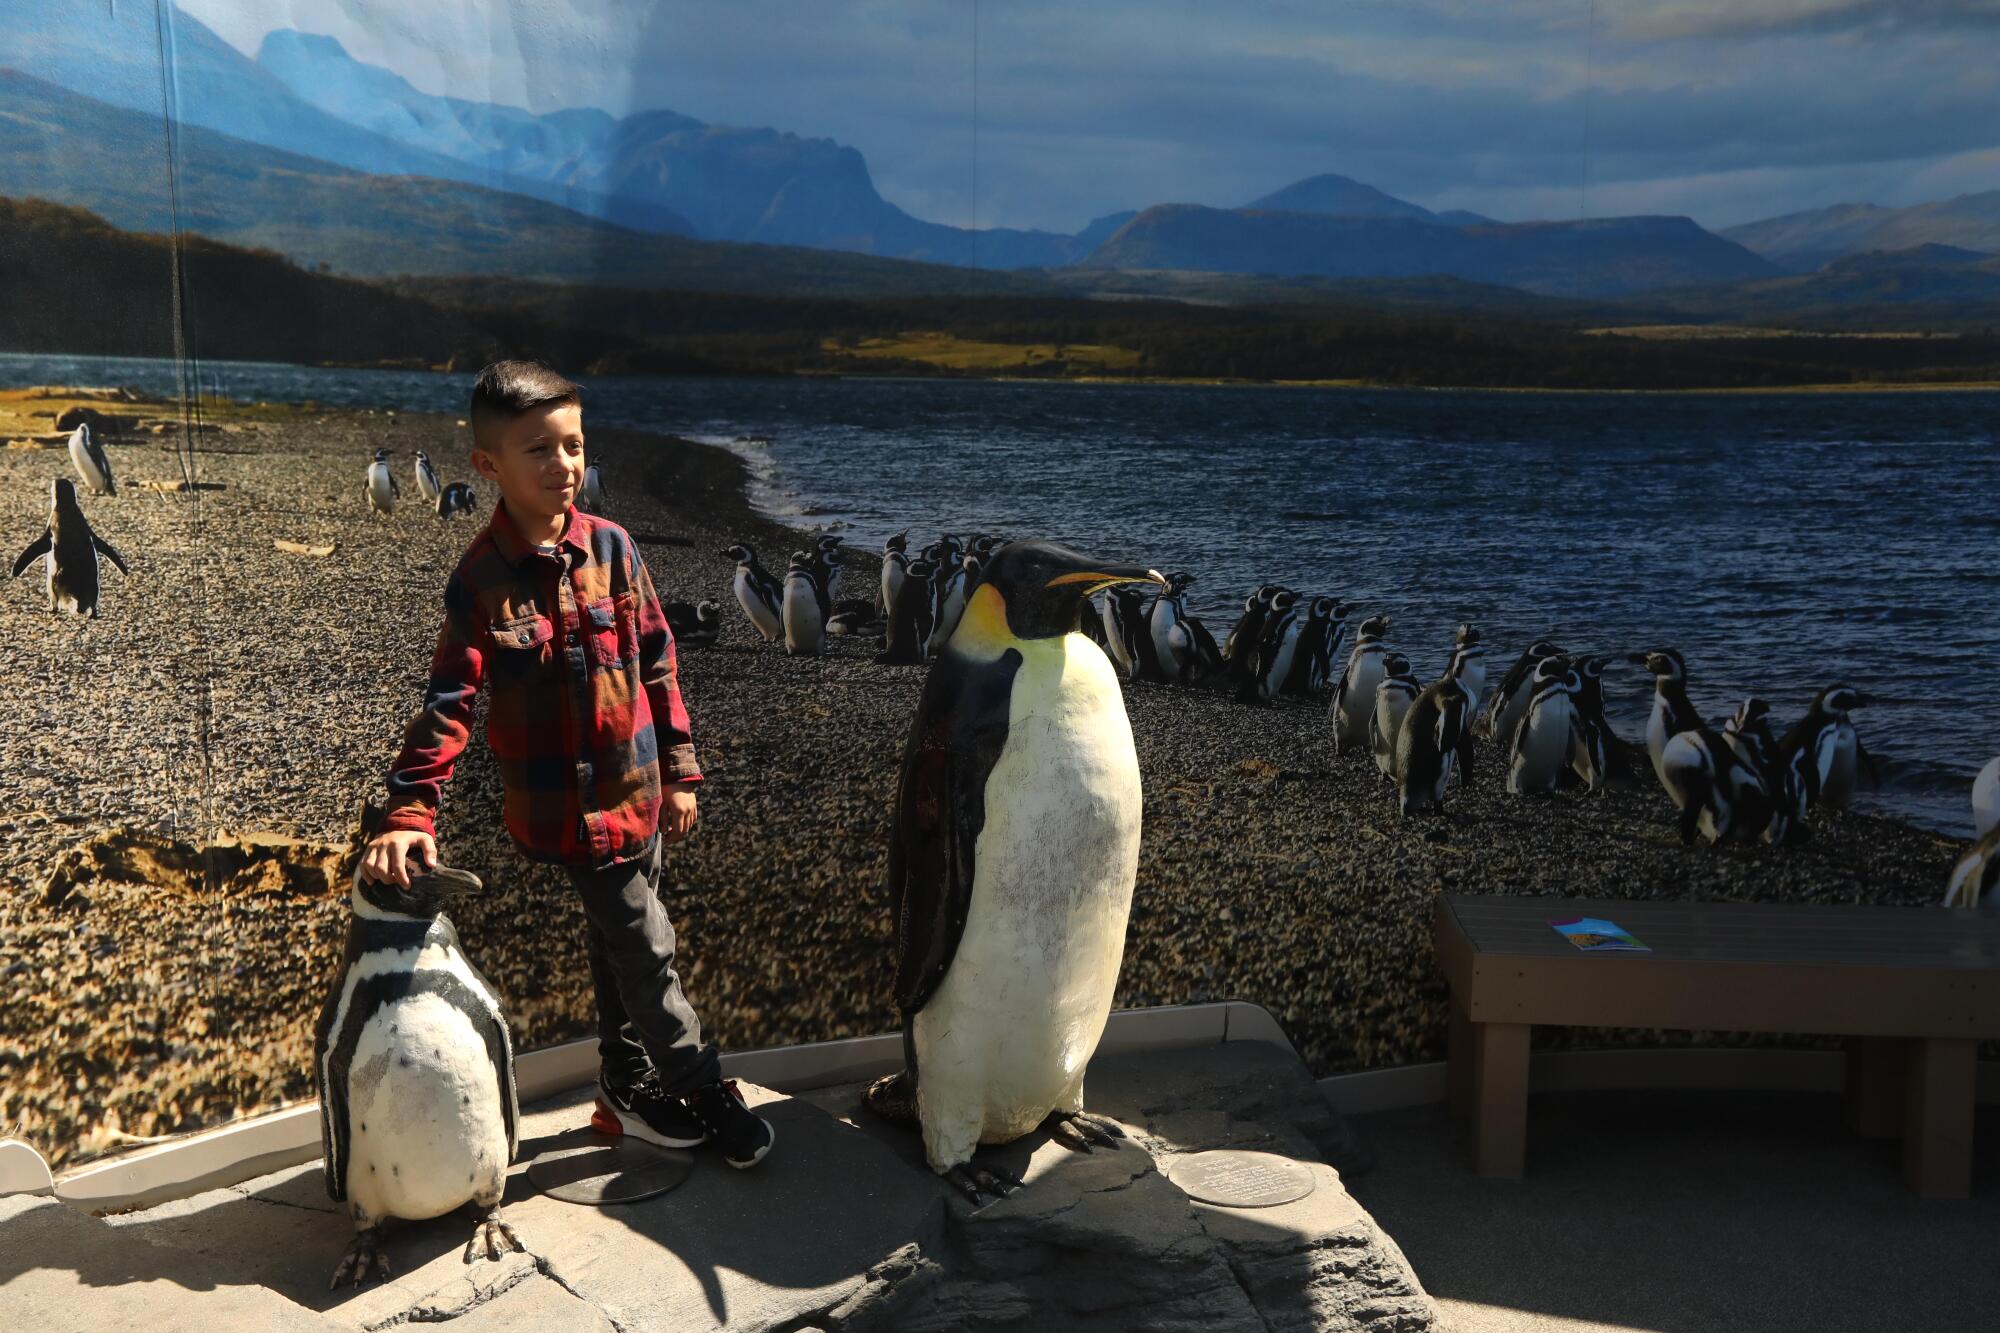 A boy rests his hand on the head of a penguin in an art display.